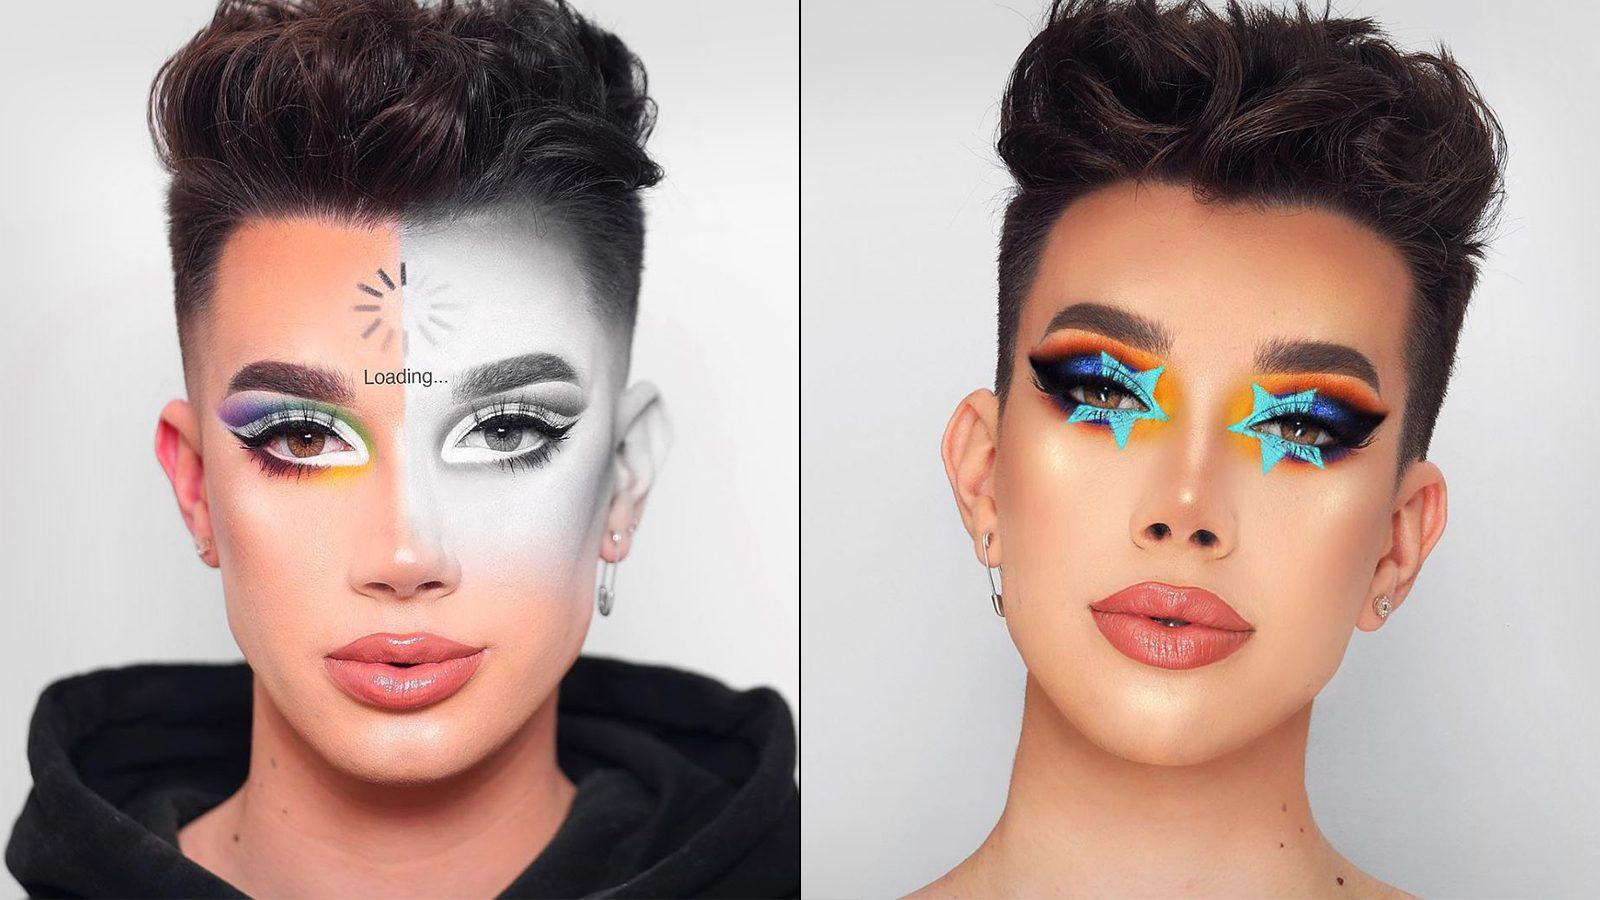 James Charles responds after criticism over photoshopped Louis